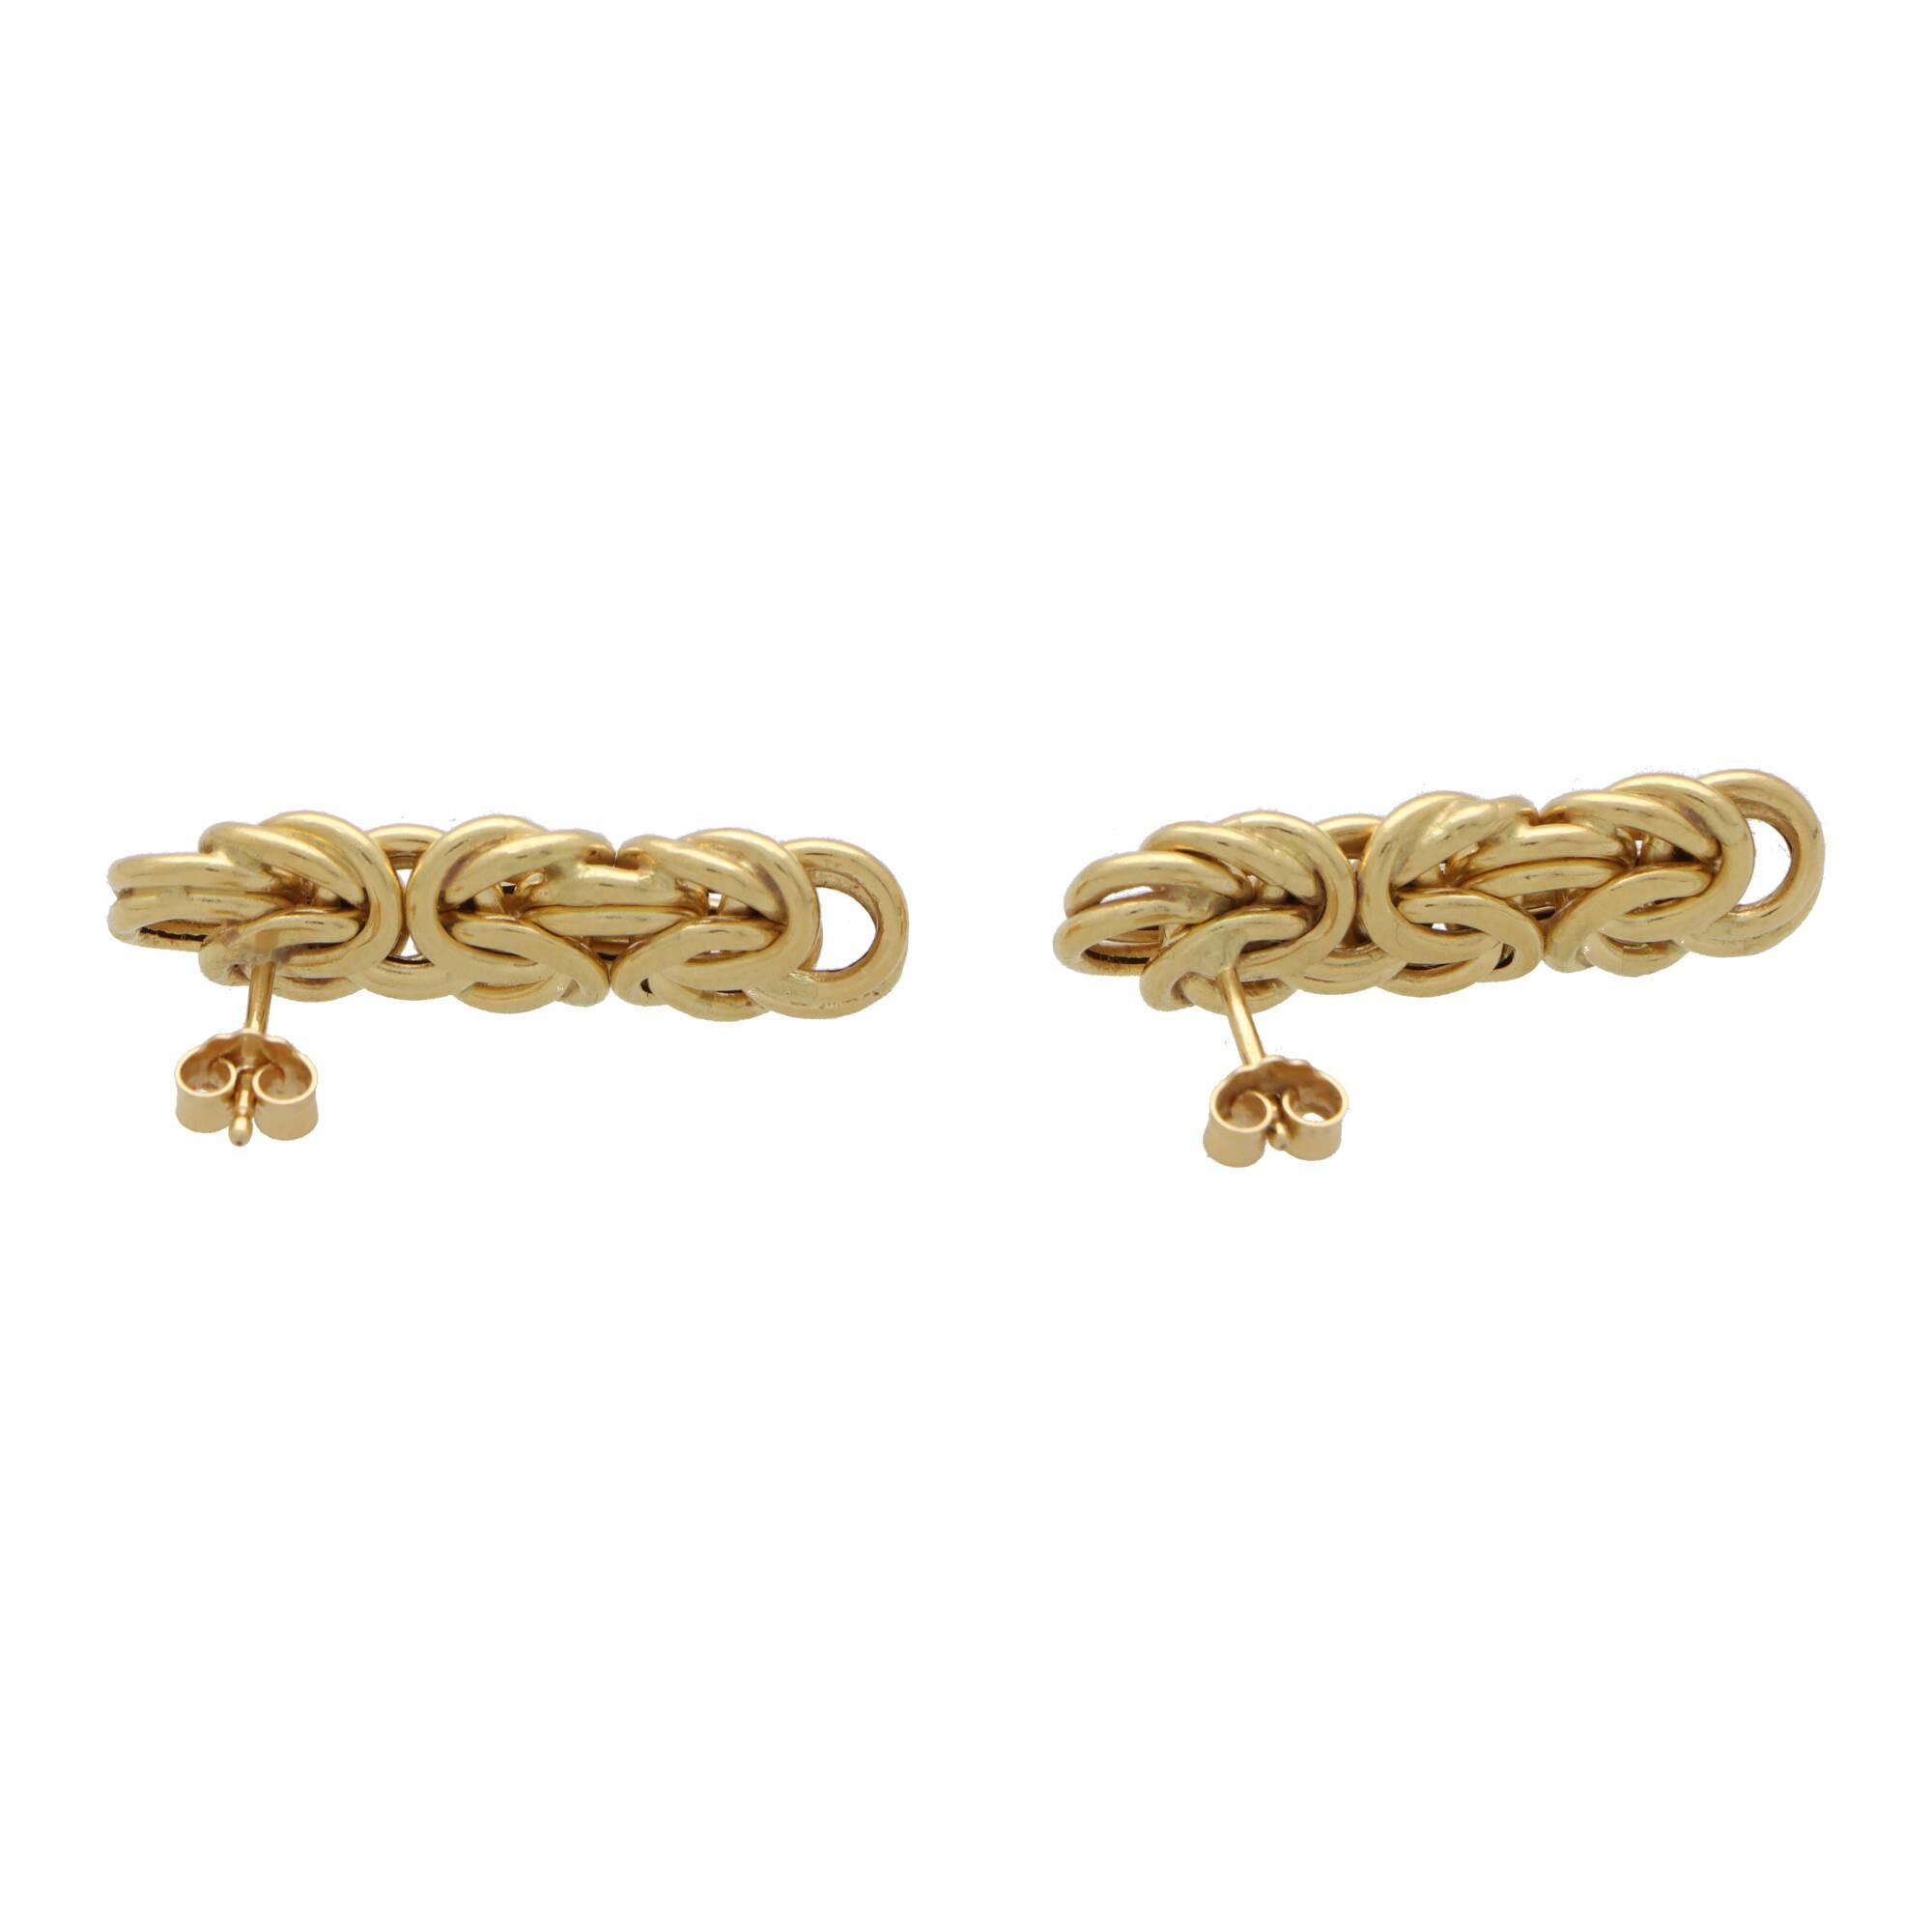 A stylish pair of vintage knotted long drop earrings set in 18k yellow gold.

Each earring is composed of a elongated knotted design which travels drown the wearers lobe. The earrings are iconic of the 1980’s and give this chunky yet practical